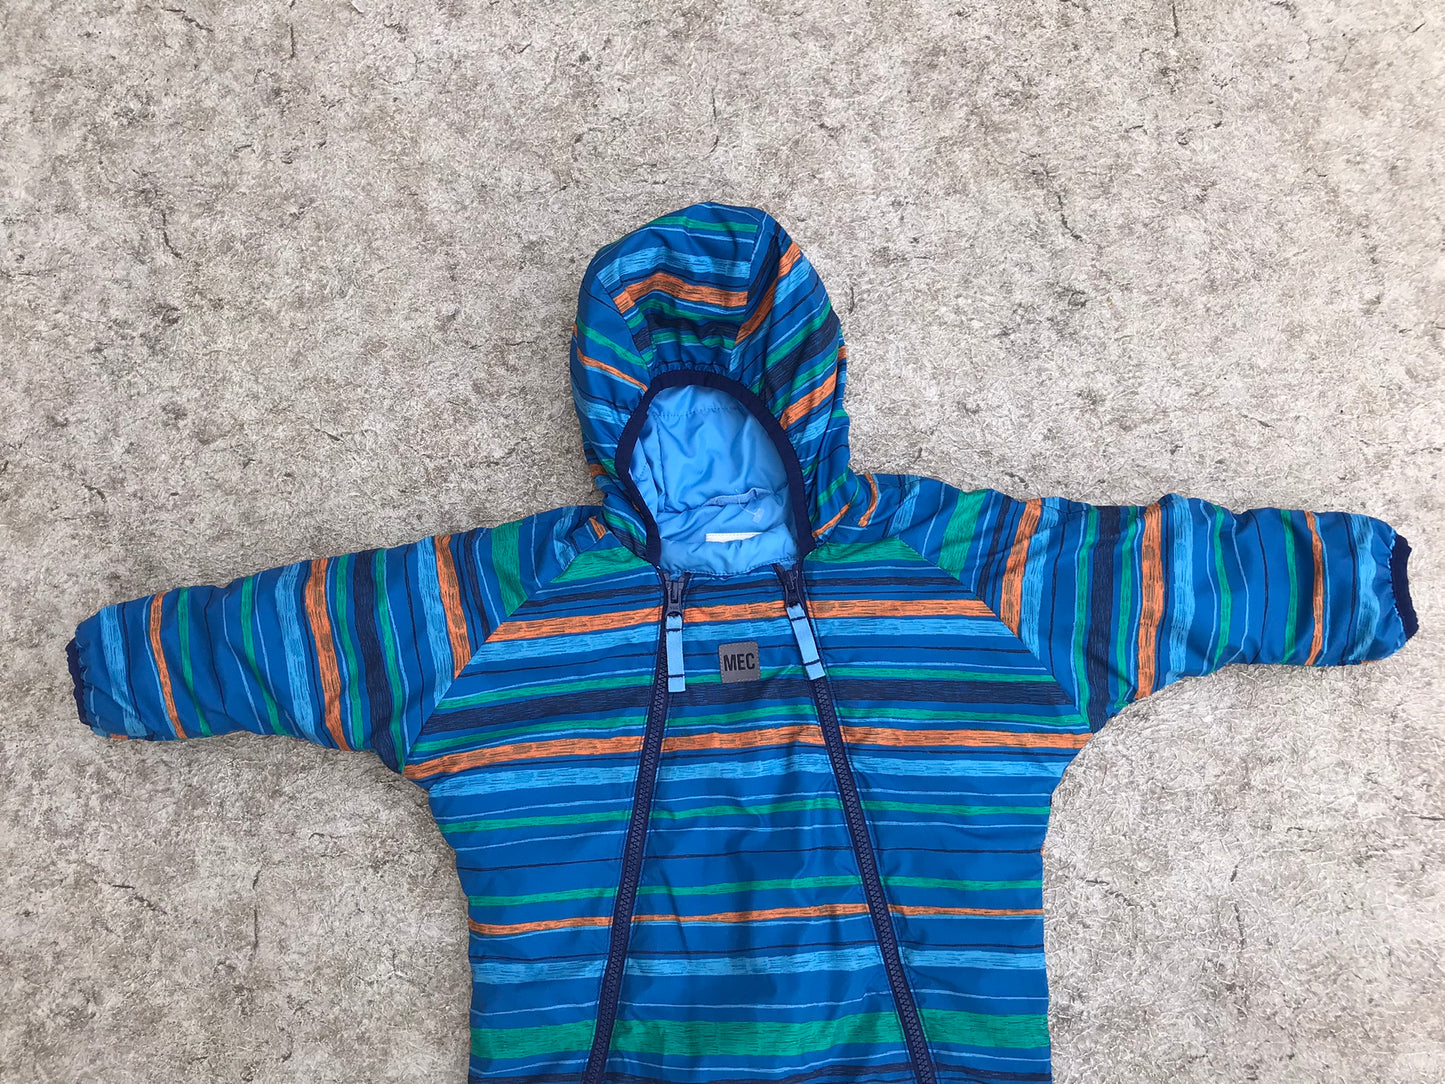 Snowsuit Child Size 18 Month MEC Blue Multi With Hand And Feet Mitts Open or Covered Small Tear On Leg